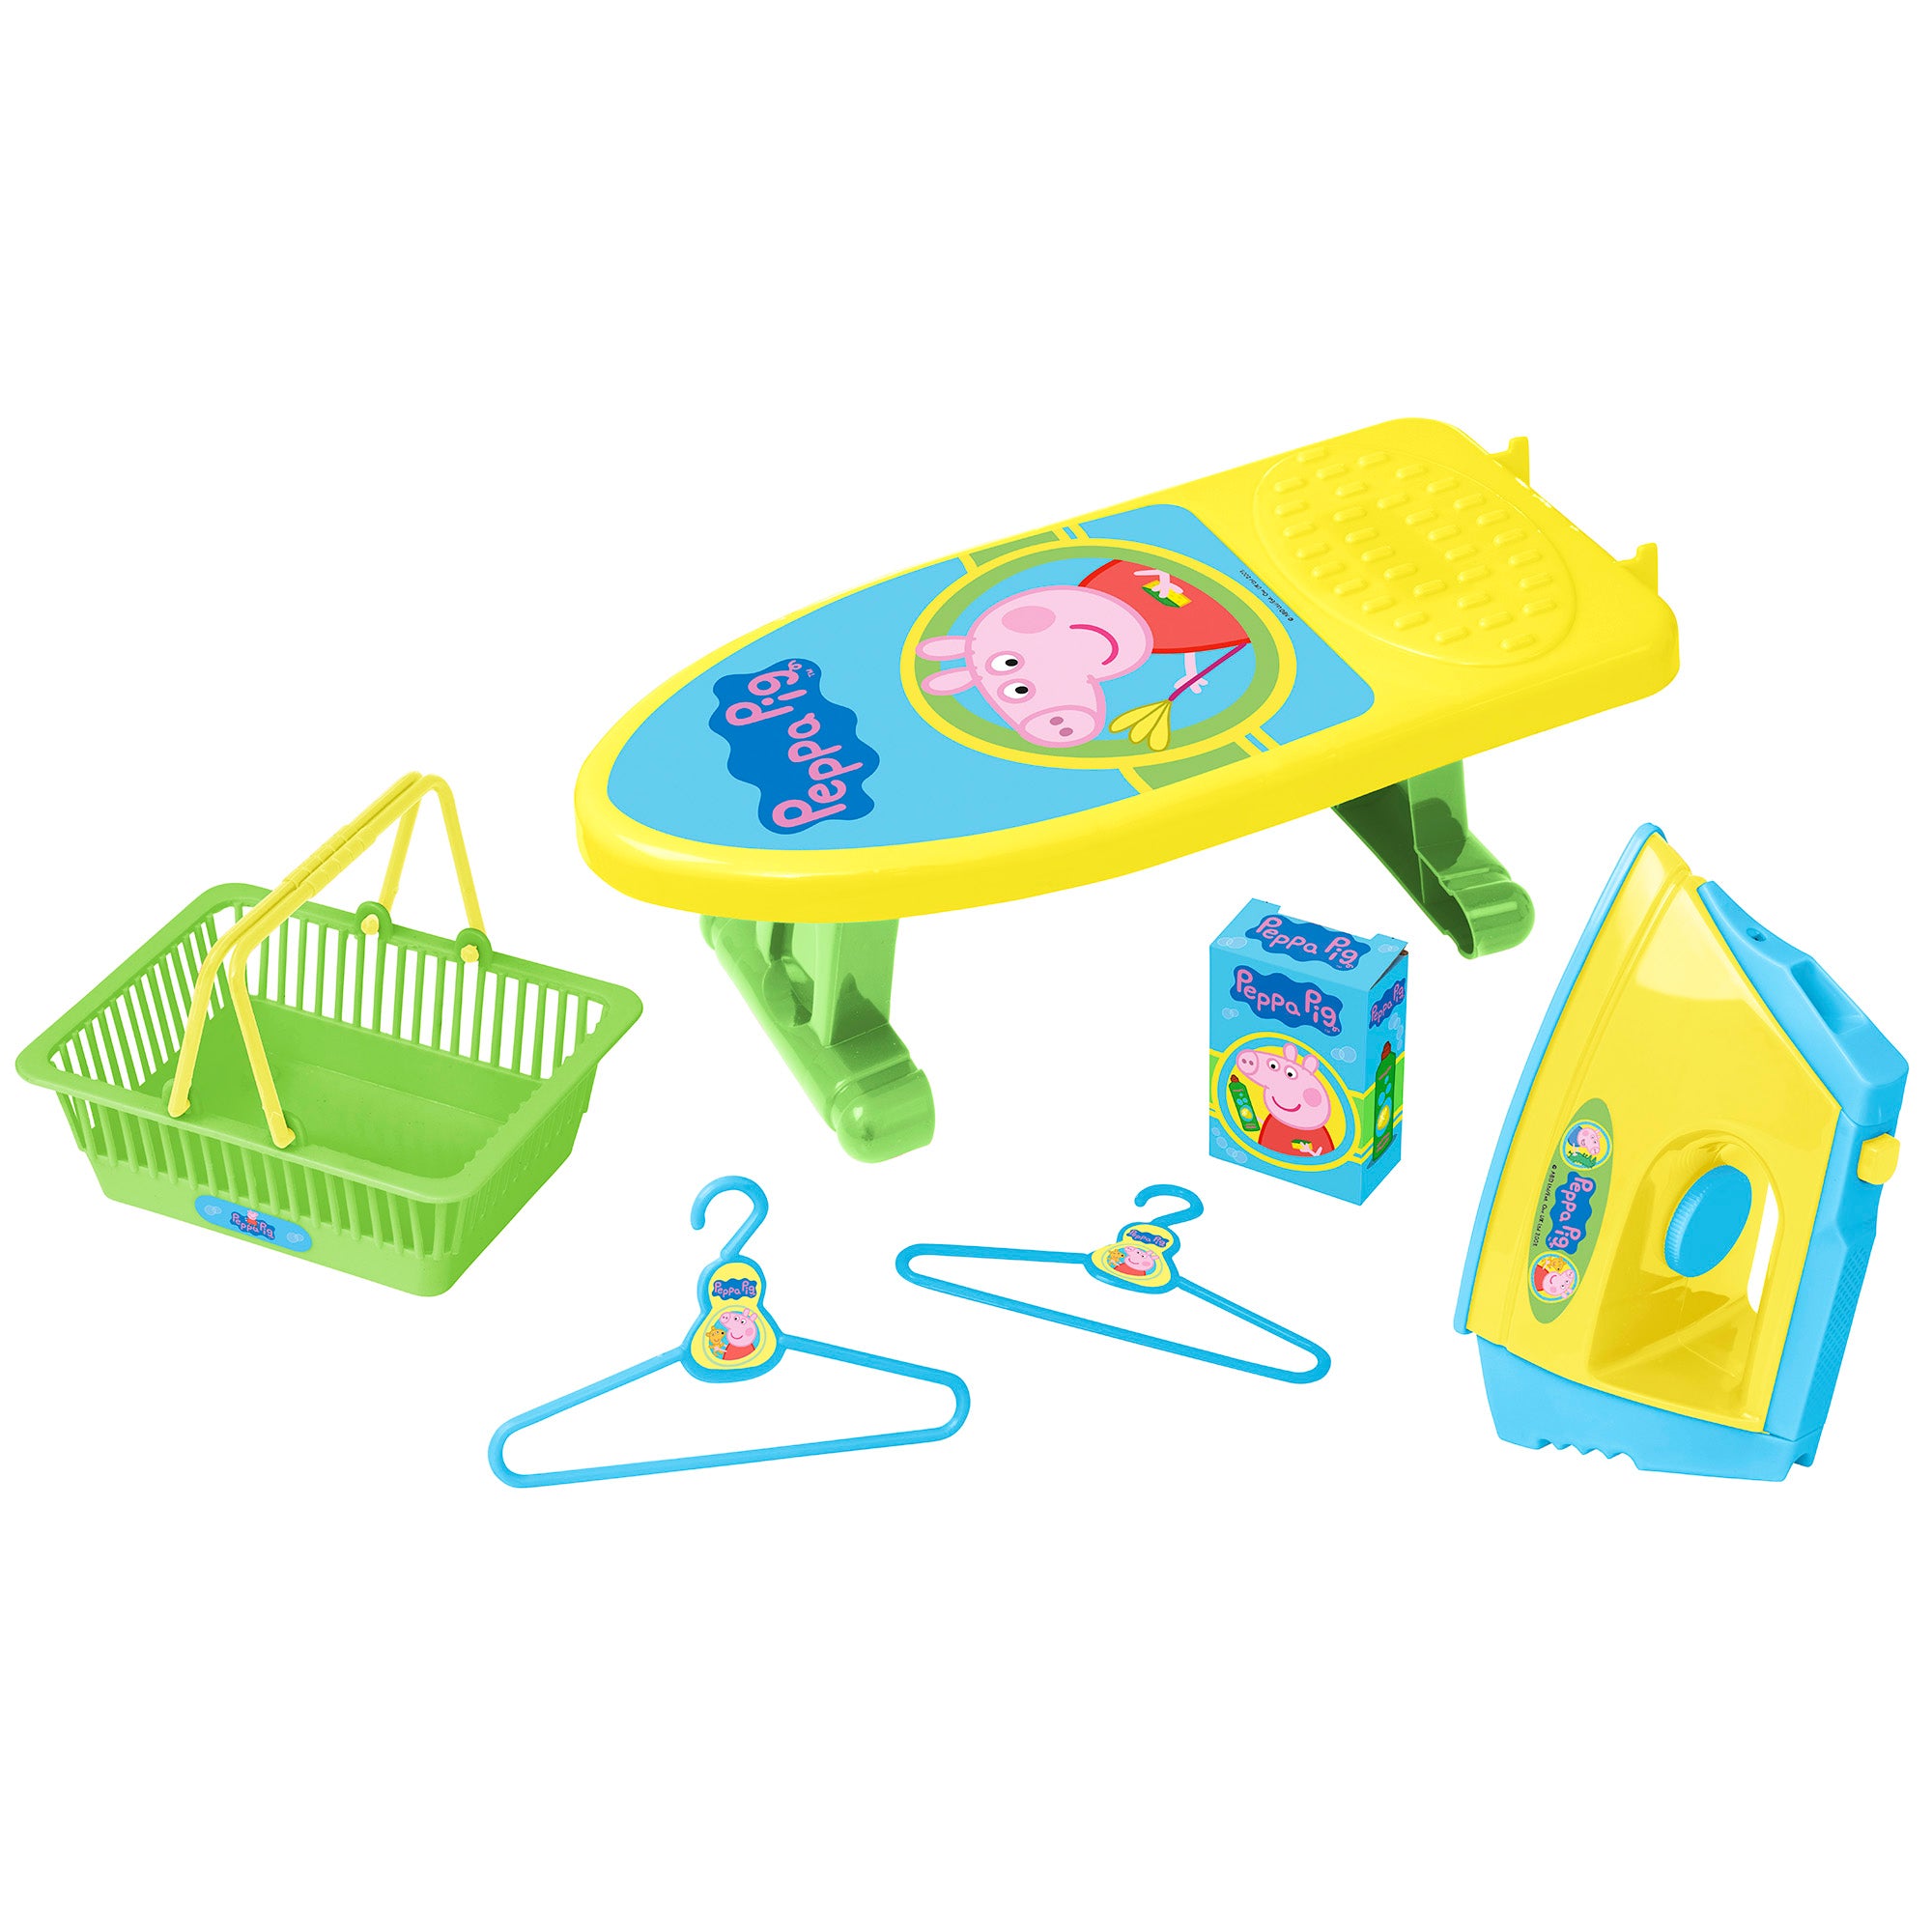 image of the peppa pig little helper set - ironing board, basket, hangers and iron